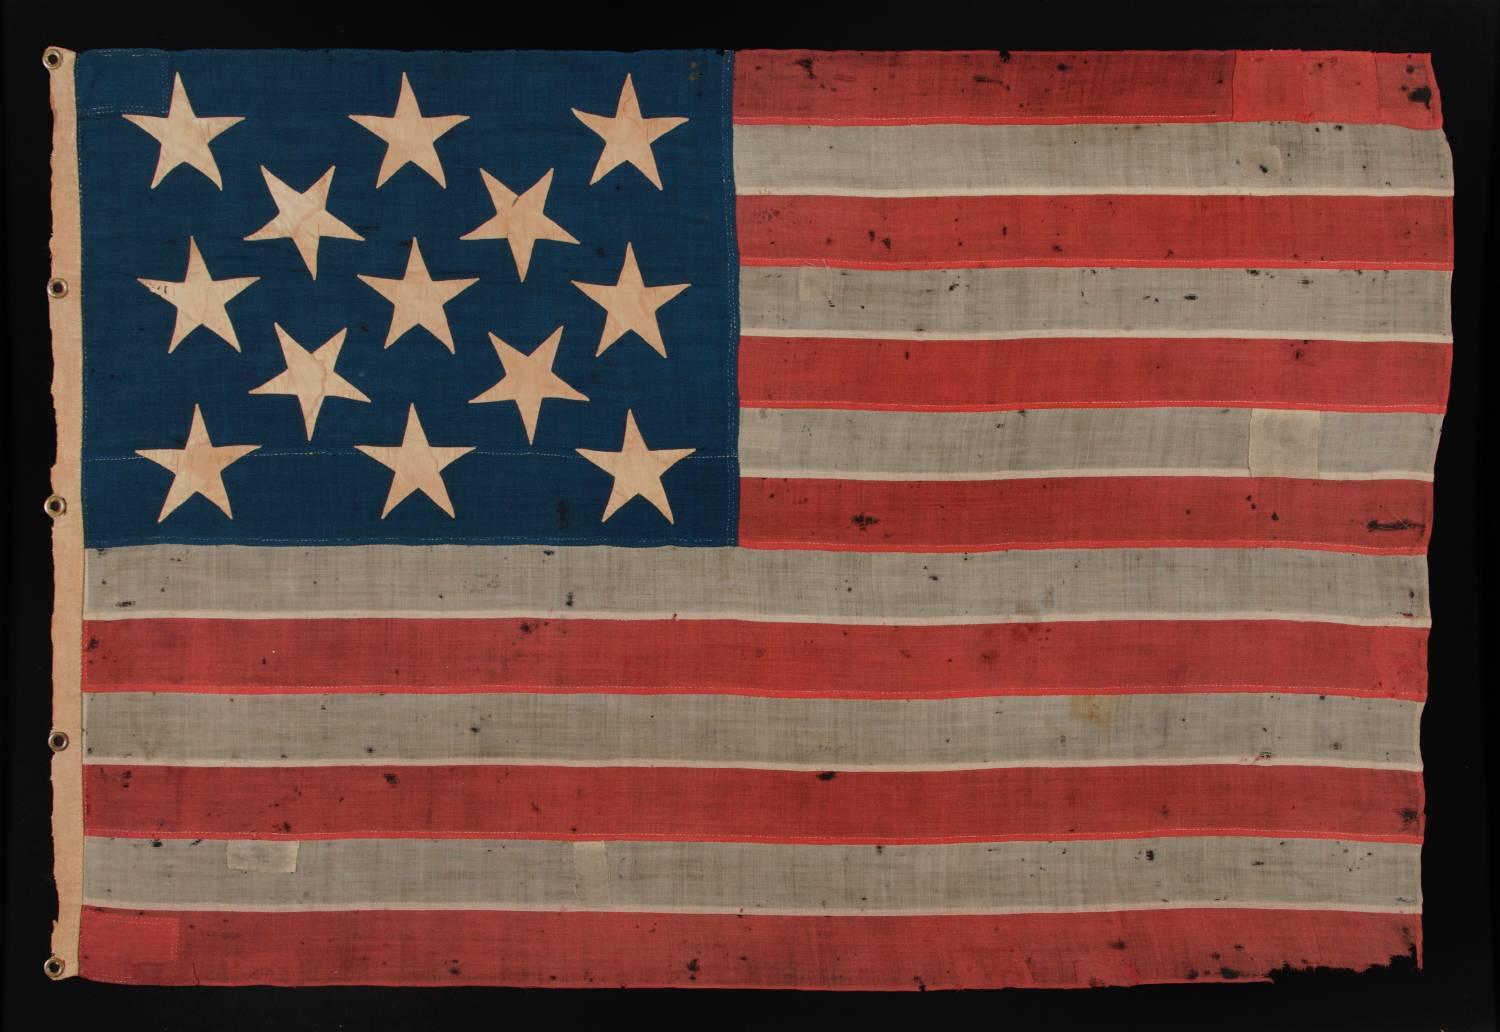 13 large and strikingly visual stars on a U.S Navy small boat ensign, entirely hand-sewn, circa 1884-1887: 13 star American national flag of the type flown by the U.S. Navy. These flags were flown at the stern, from a gaff, or from the yard-arm on a